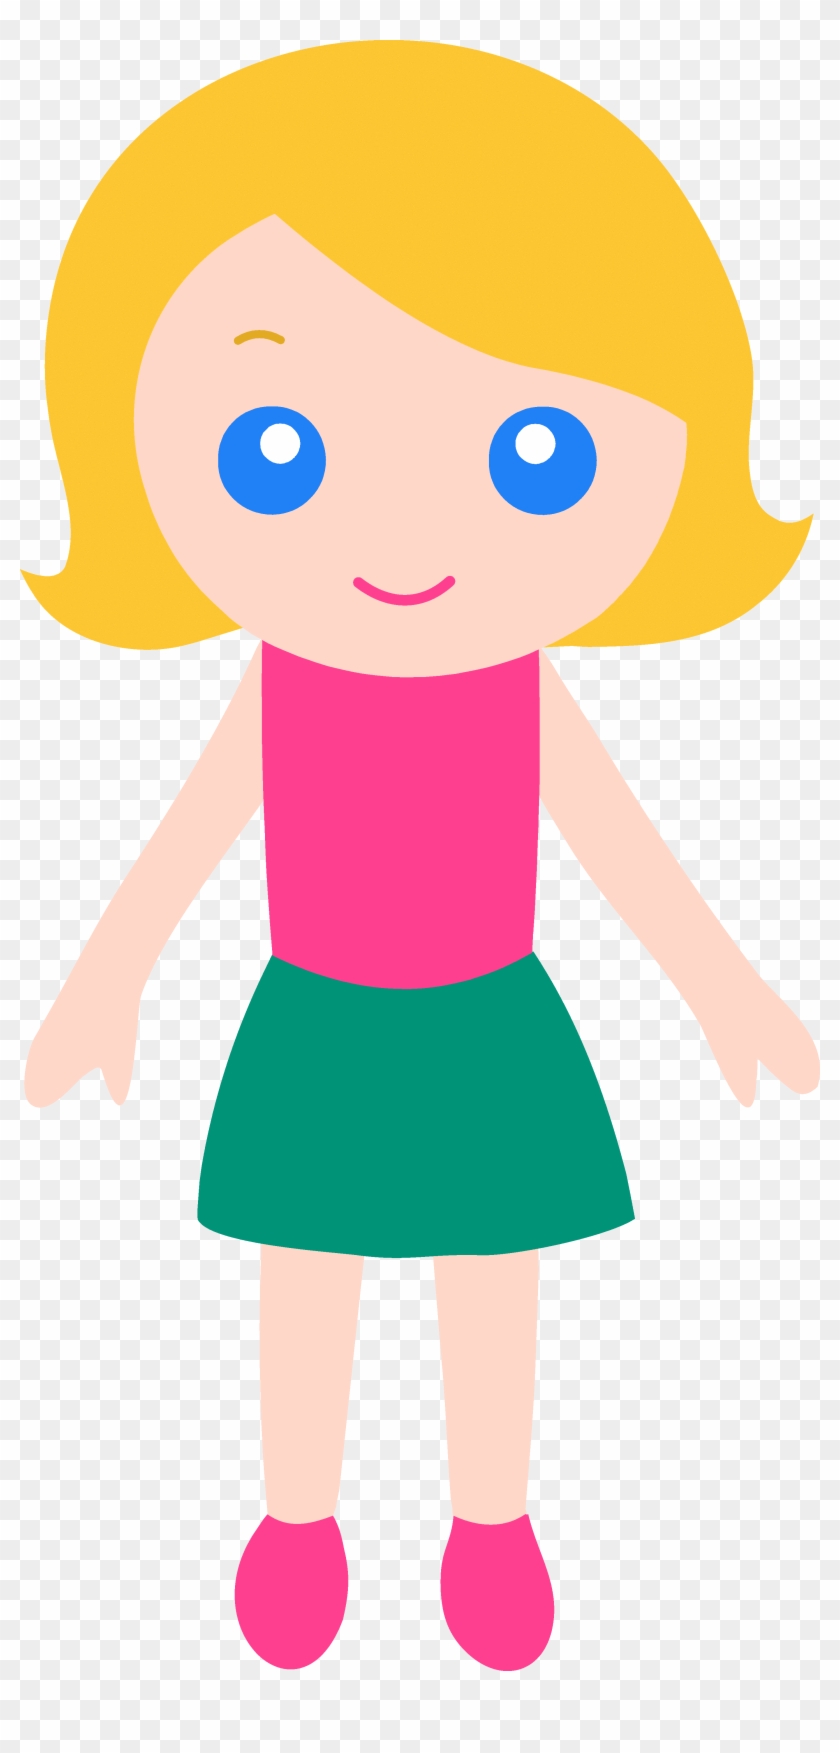 Swimming Buddy Clipart - Cartoon Girl With Blonde Hair And Blue Eyes #1144340